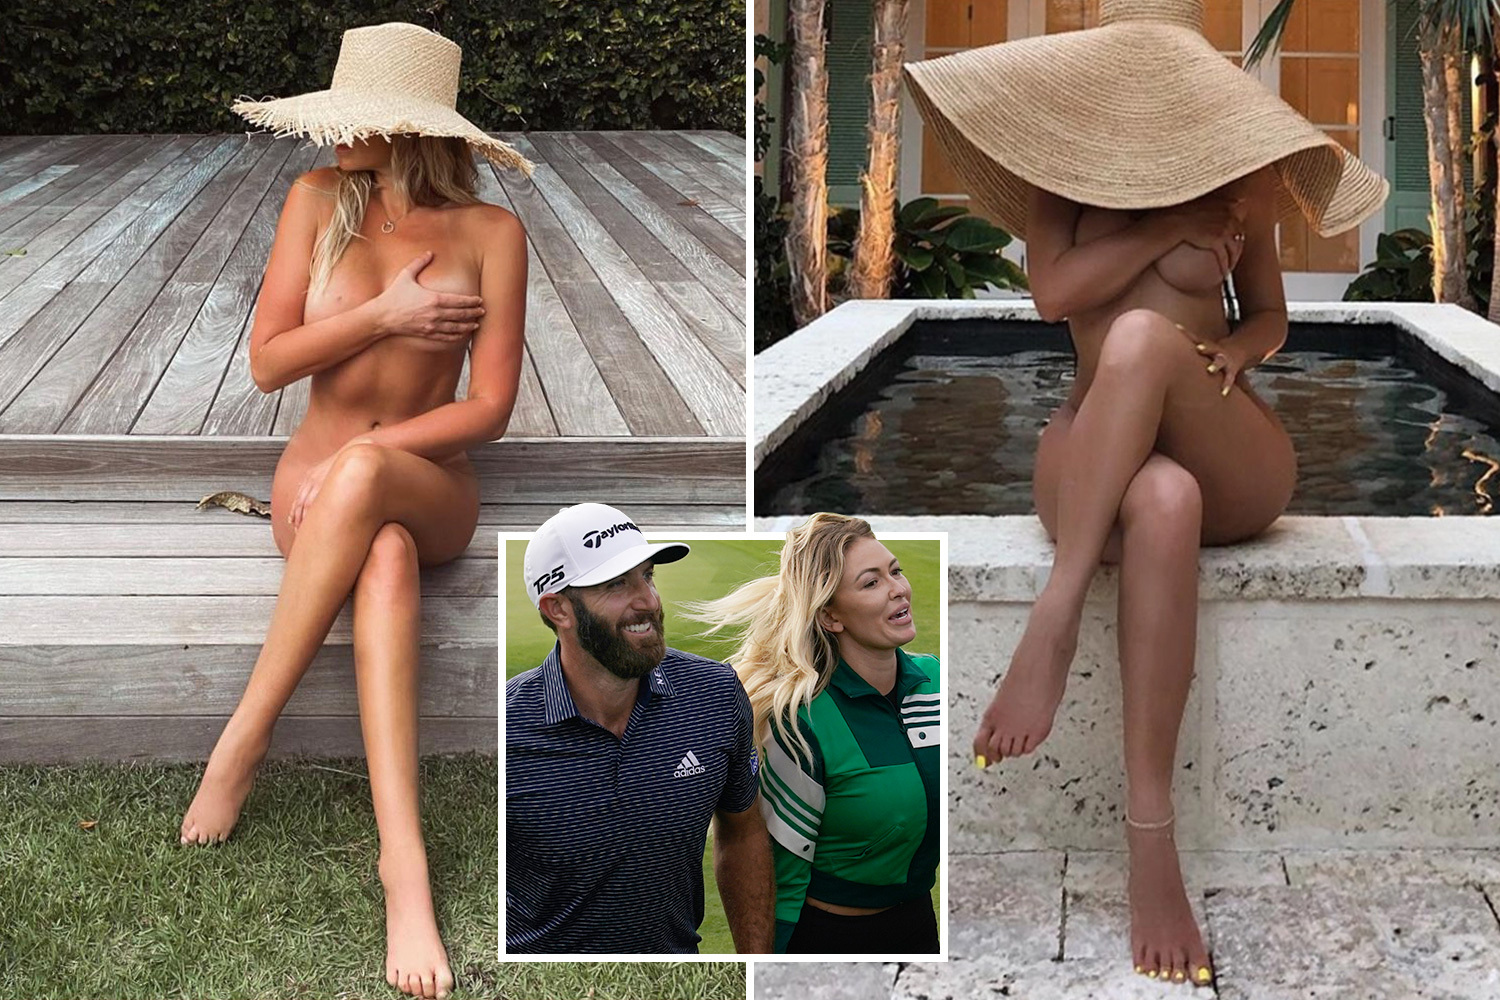 albert chasse recommends paulina gretzky naked pic